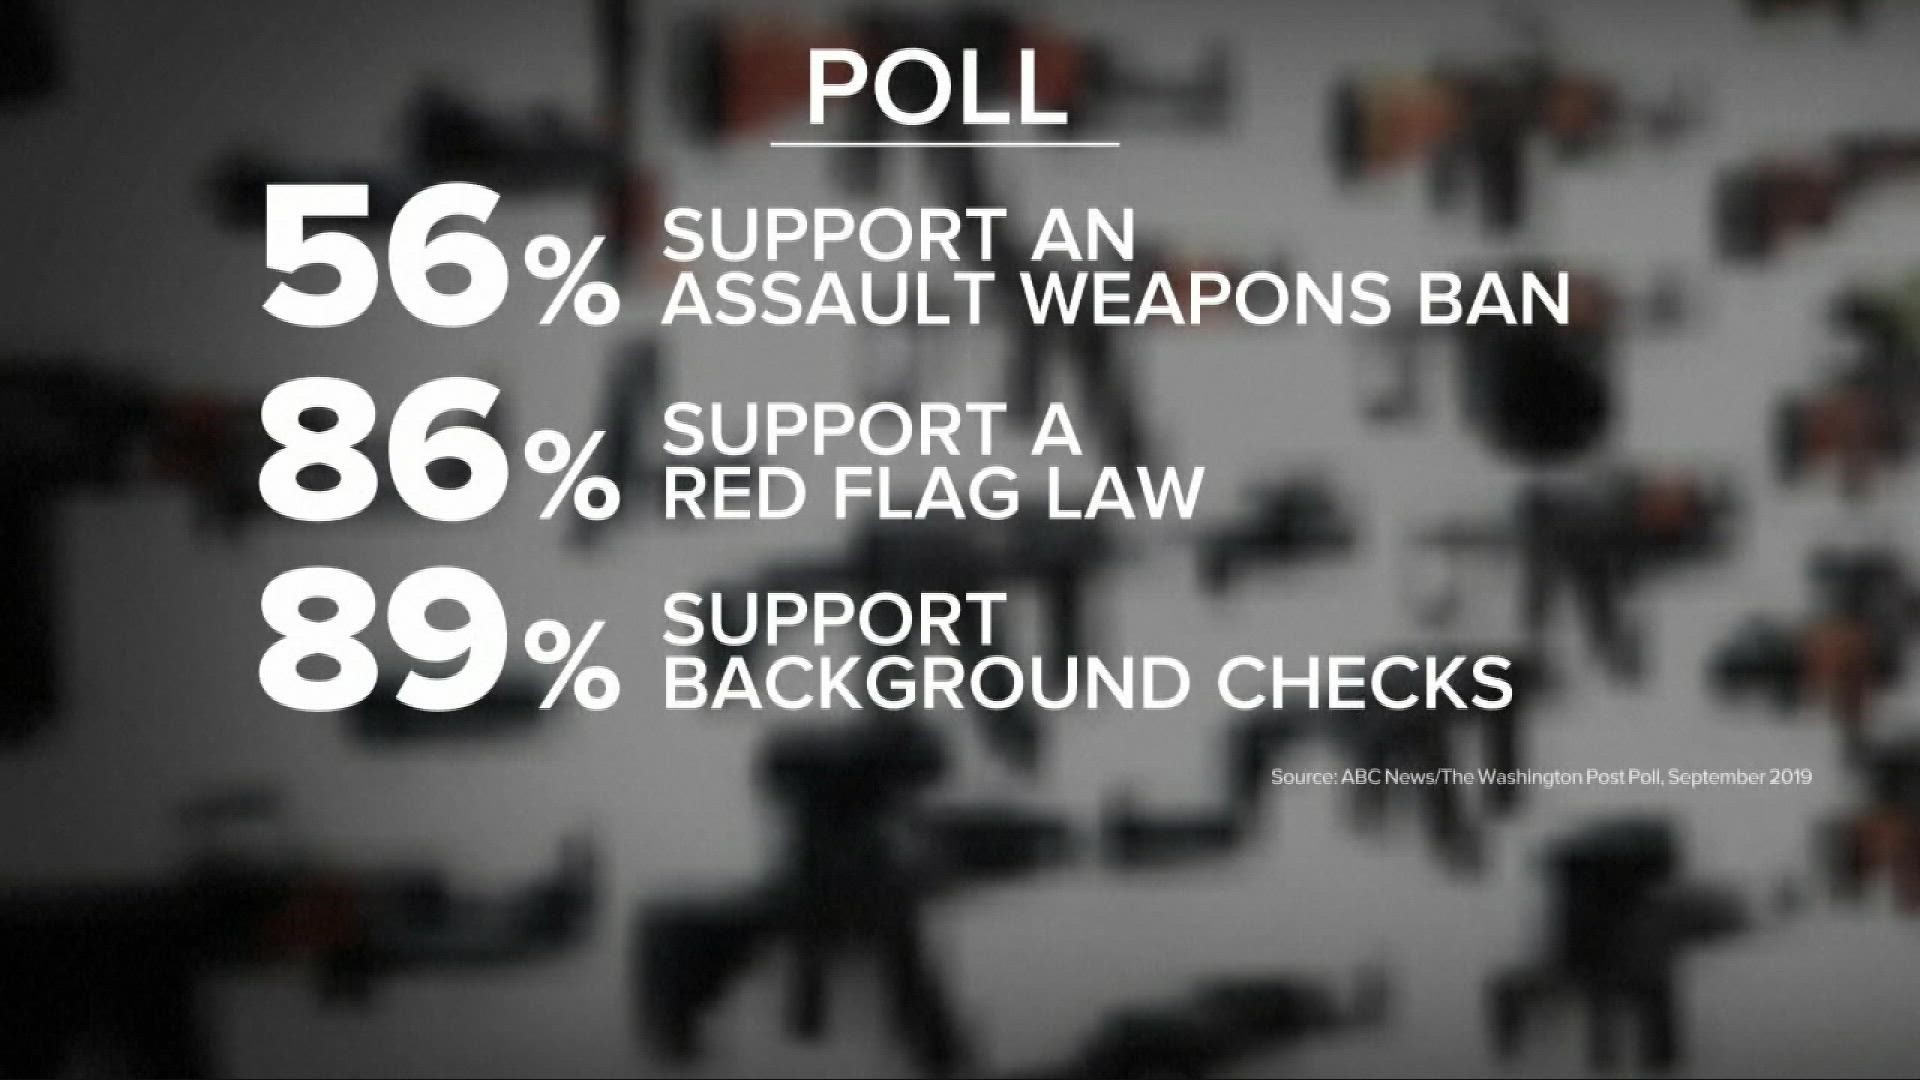 Polls show Americans support background checks, a ban on assault weapons and other gun control measures.